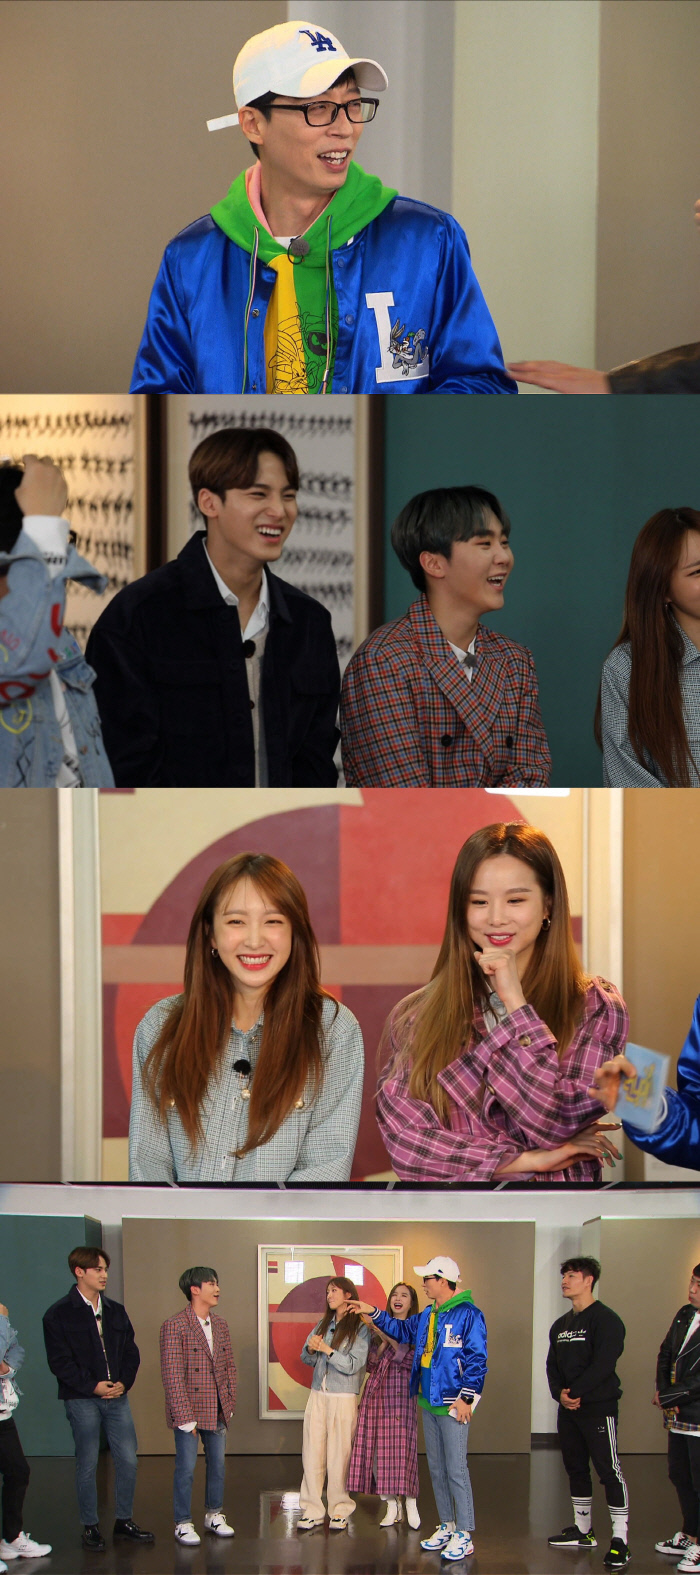 In <Running Man>, which is broadcasted on Sunday, 21st, the national MC Yoo Jae-Suk turns into an unexpected single.Yoo Jae-Suk will hold a single-talking process without hesitation to guests.On this day, Yoo Jae-Suk conducted interviews with guest Kim Hye-yoon, EXID Hani & Solidie, Seventeen Boo Seungkwan & Min Kyu, Han Bo-reum and current and personal period.However, Yoo Jae-Suk turned into a talk outlaw who gave a bad reputation during the guests personal period or interview, and embarrassed the guest, and the members of Running Man shouted, Why is it today?But without giving in here, the Yoo Jae-Suks vitriol progress continued.In particular, Yoo Jae-Suk saw the individual skills of Seventeen Boo Seungkwan and said, When the time was burned in the personal age, after the role of Yes in the drama Sky Castle, Kim Hye-yoon, who reported the recent situation without the next work, Onerae popularity disappears soon.Another guest, Han Bo-reum, showed rap and dance skills, but when he did not show his ability more than usual, he said, You can see that the opening is ruined today!One group Running Man vitriolic character Kim Jong Kook praised It is so good, it is my style in the unexpected vitriolic character of Yoo Jae-Suk, and made the members of the scene laugh.The unexpected scene of the national MC Yoo Jae-Suks vitriol will be revealed on Sunday, 21st at 5 pm on the Running Man.